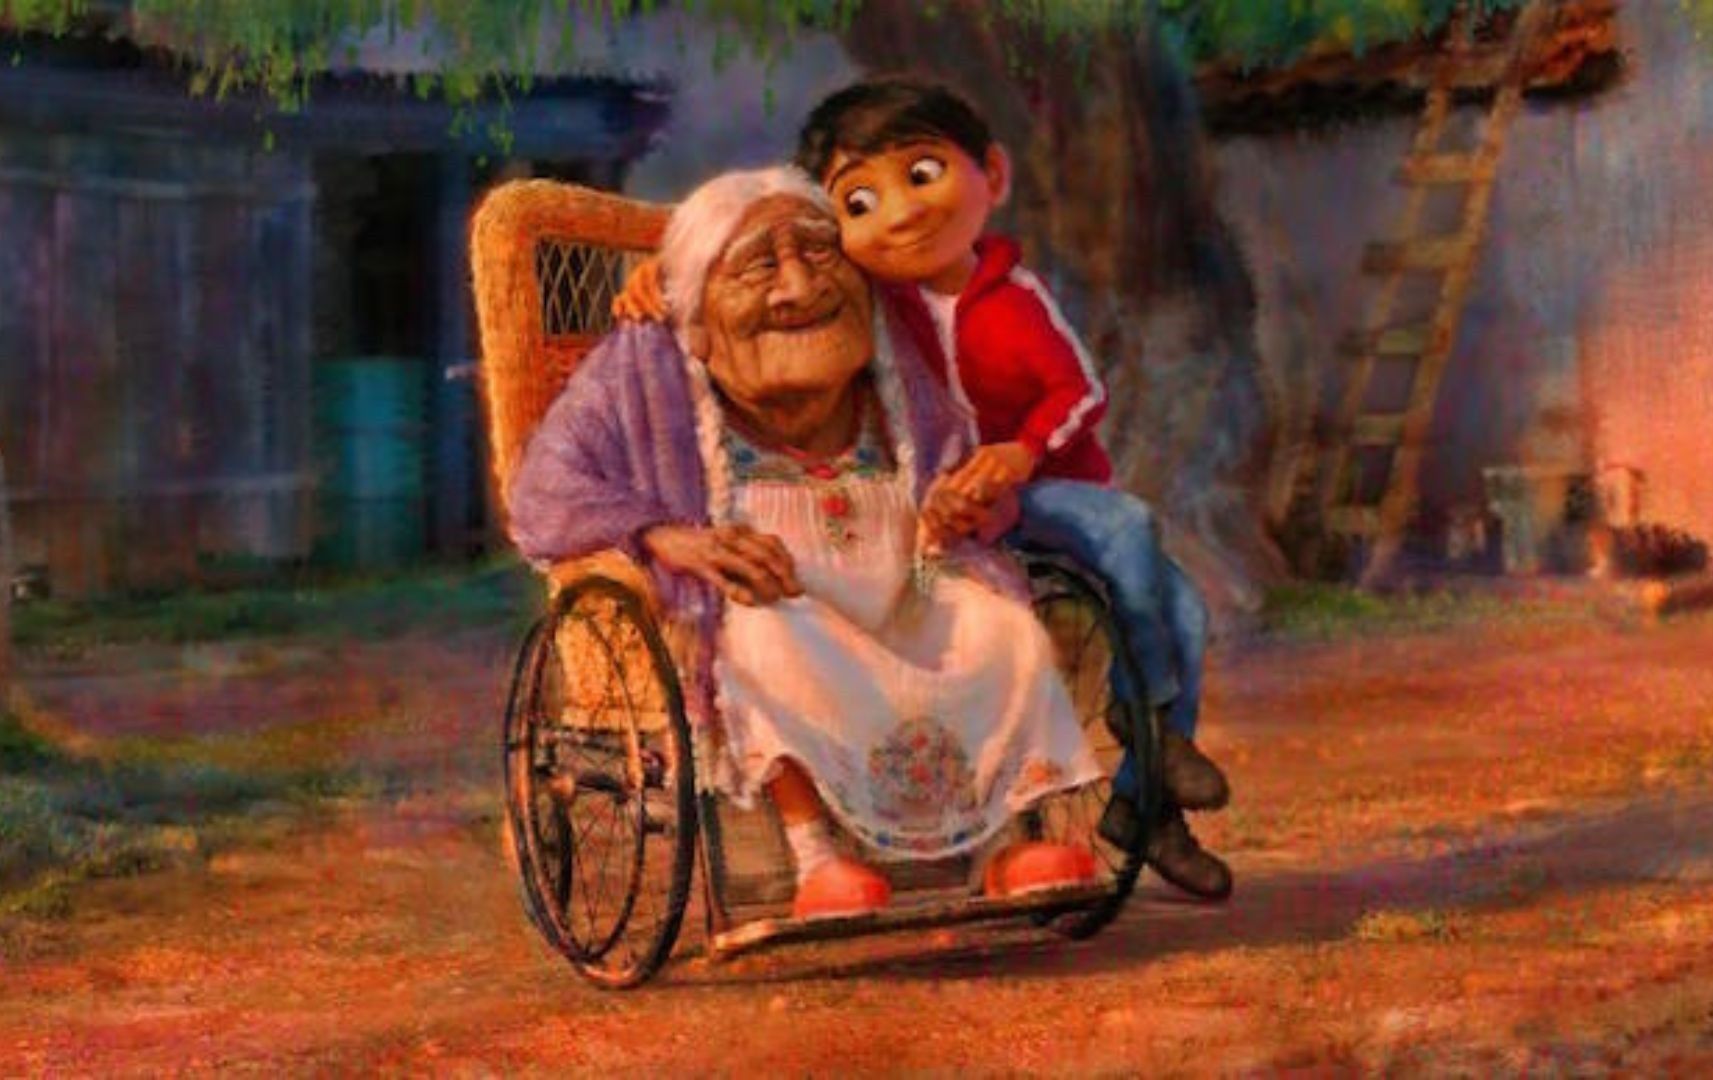 Coco' movie's real mama honored on Mexico's Day of Dead